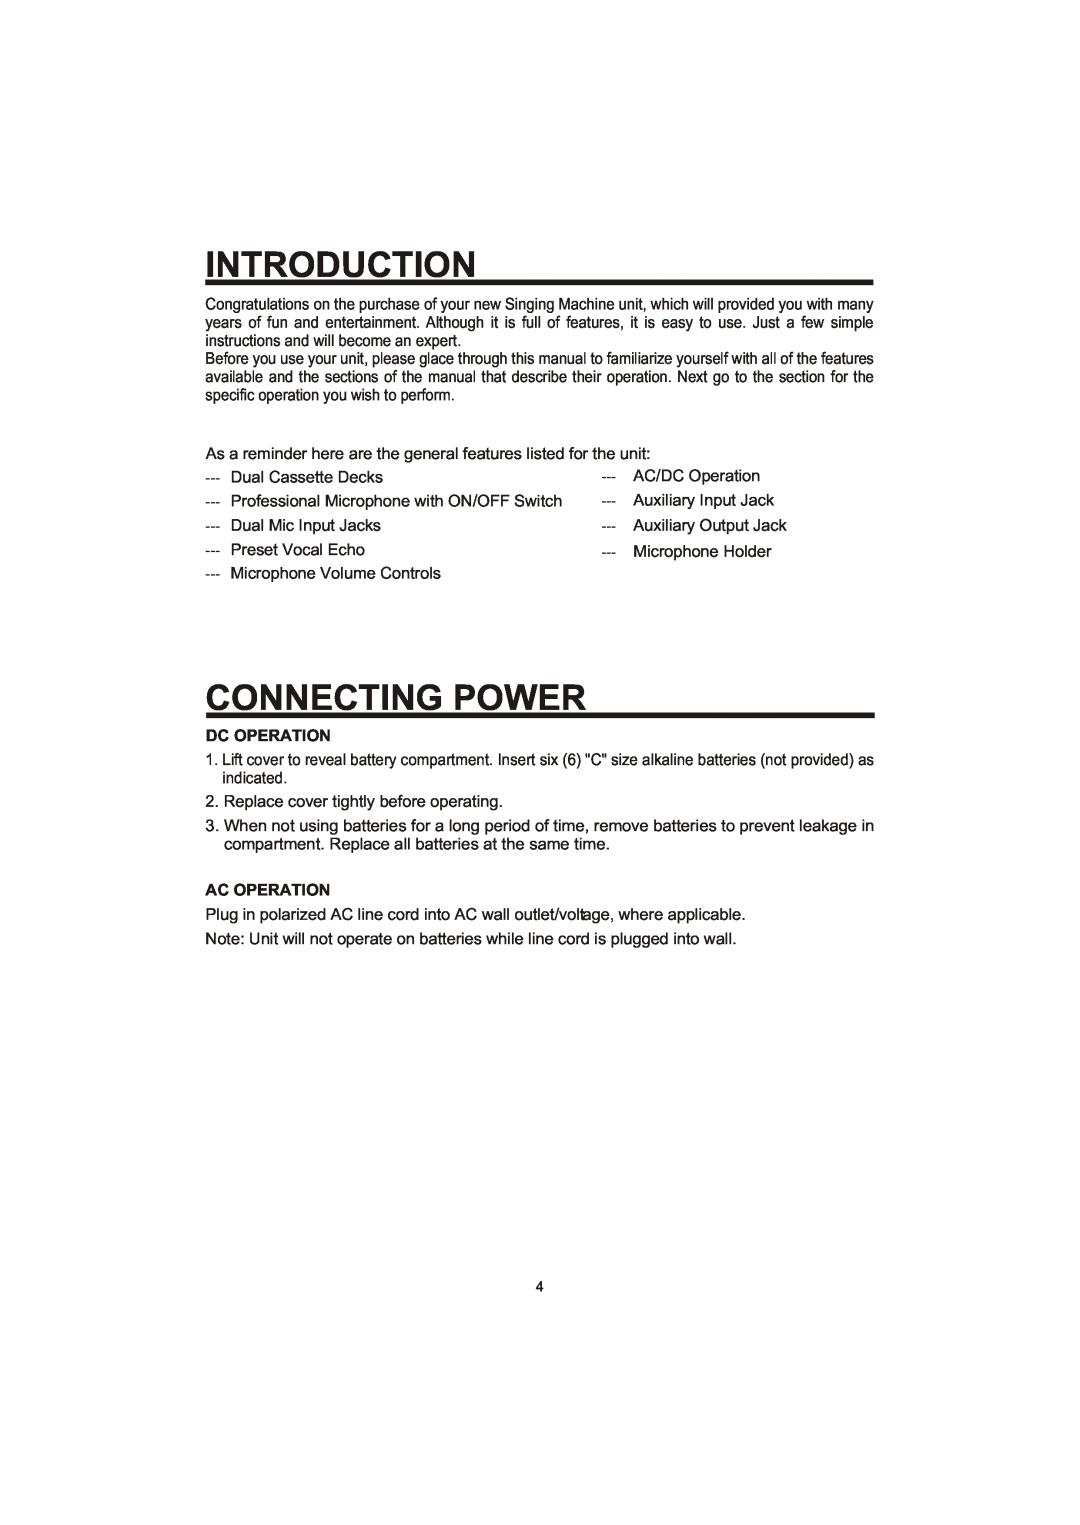 The Singing Machine SME-378 owner manual Introduction, Connecting Power, Dc Operation, Ac Operation 